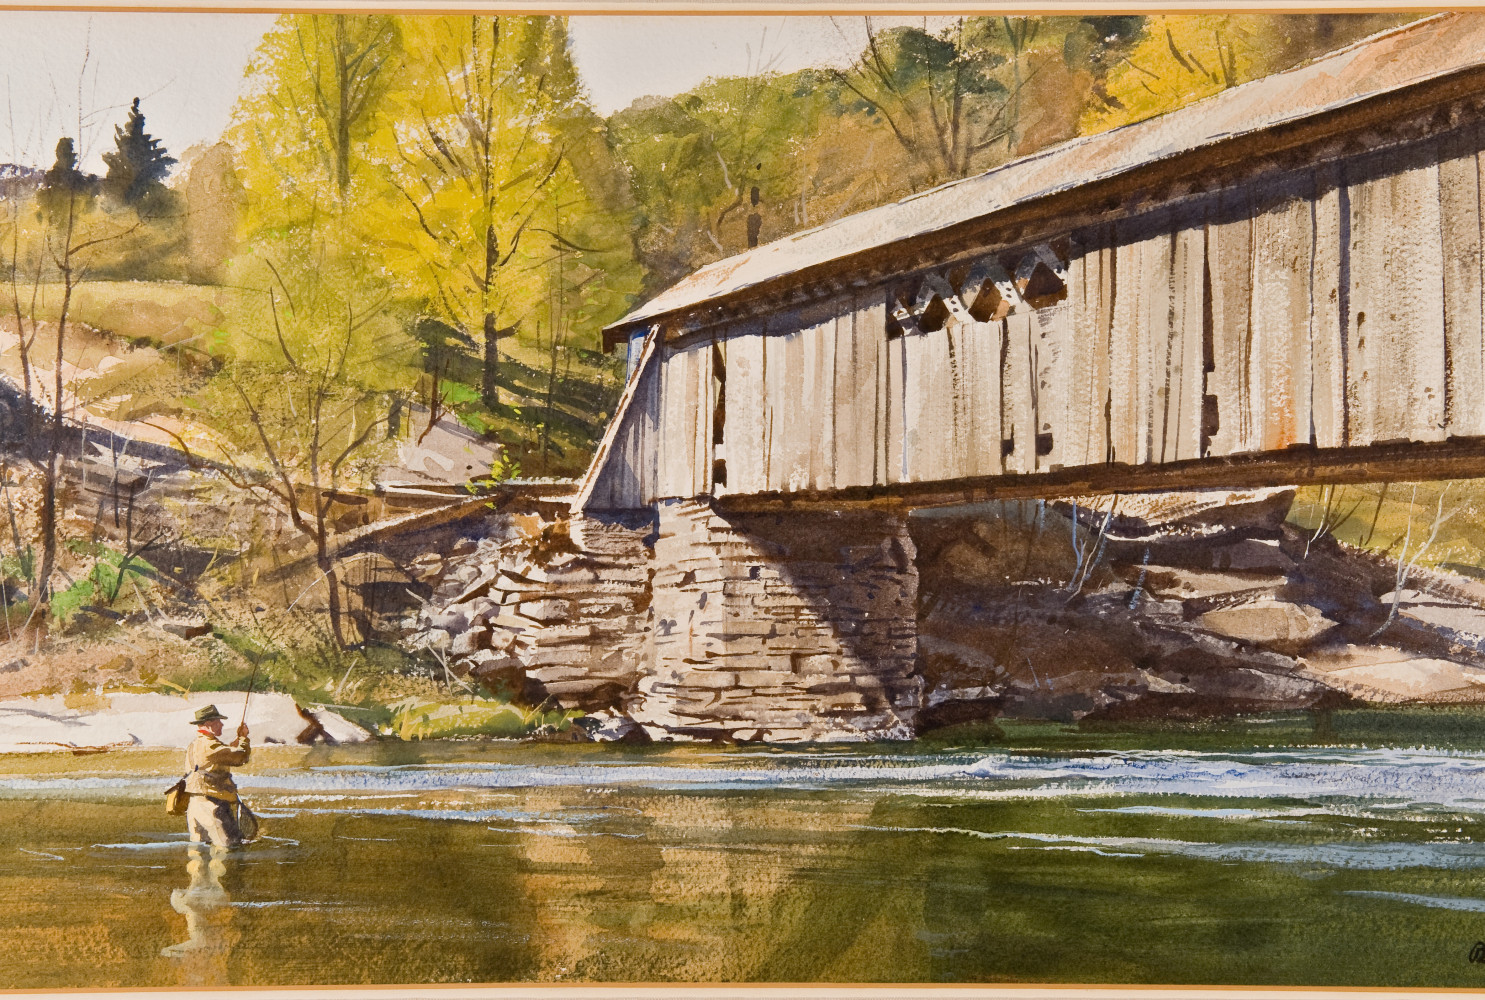 Beaverkill Bridge, 1952, By Ogden M. Pleissner (American, 1905—1983); Watercolor on paper; 18 x 31 inches; Collection of Shelburne Museum, gift of Morton Quantrell, 1996-42.4. Photography by Andy Duback.